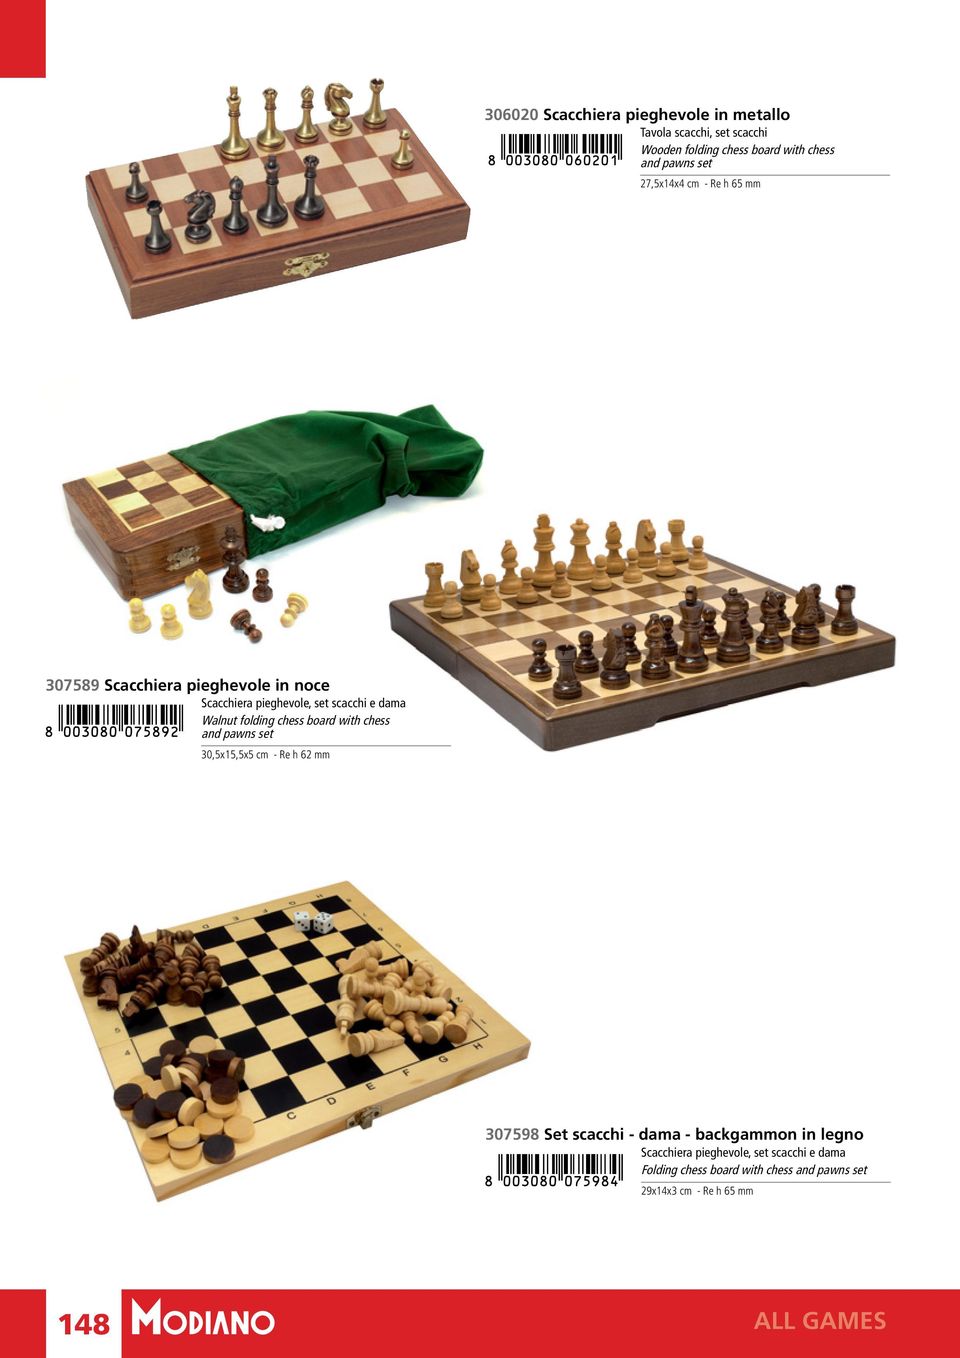 chess board with chess and pawns set 30,5x15,5x5 cm - Re h 62 mm 307598 Set scacchi - dama - backgammon in legno